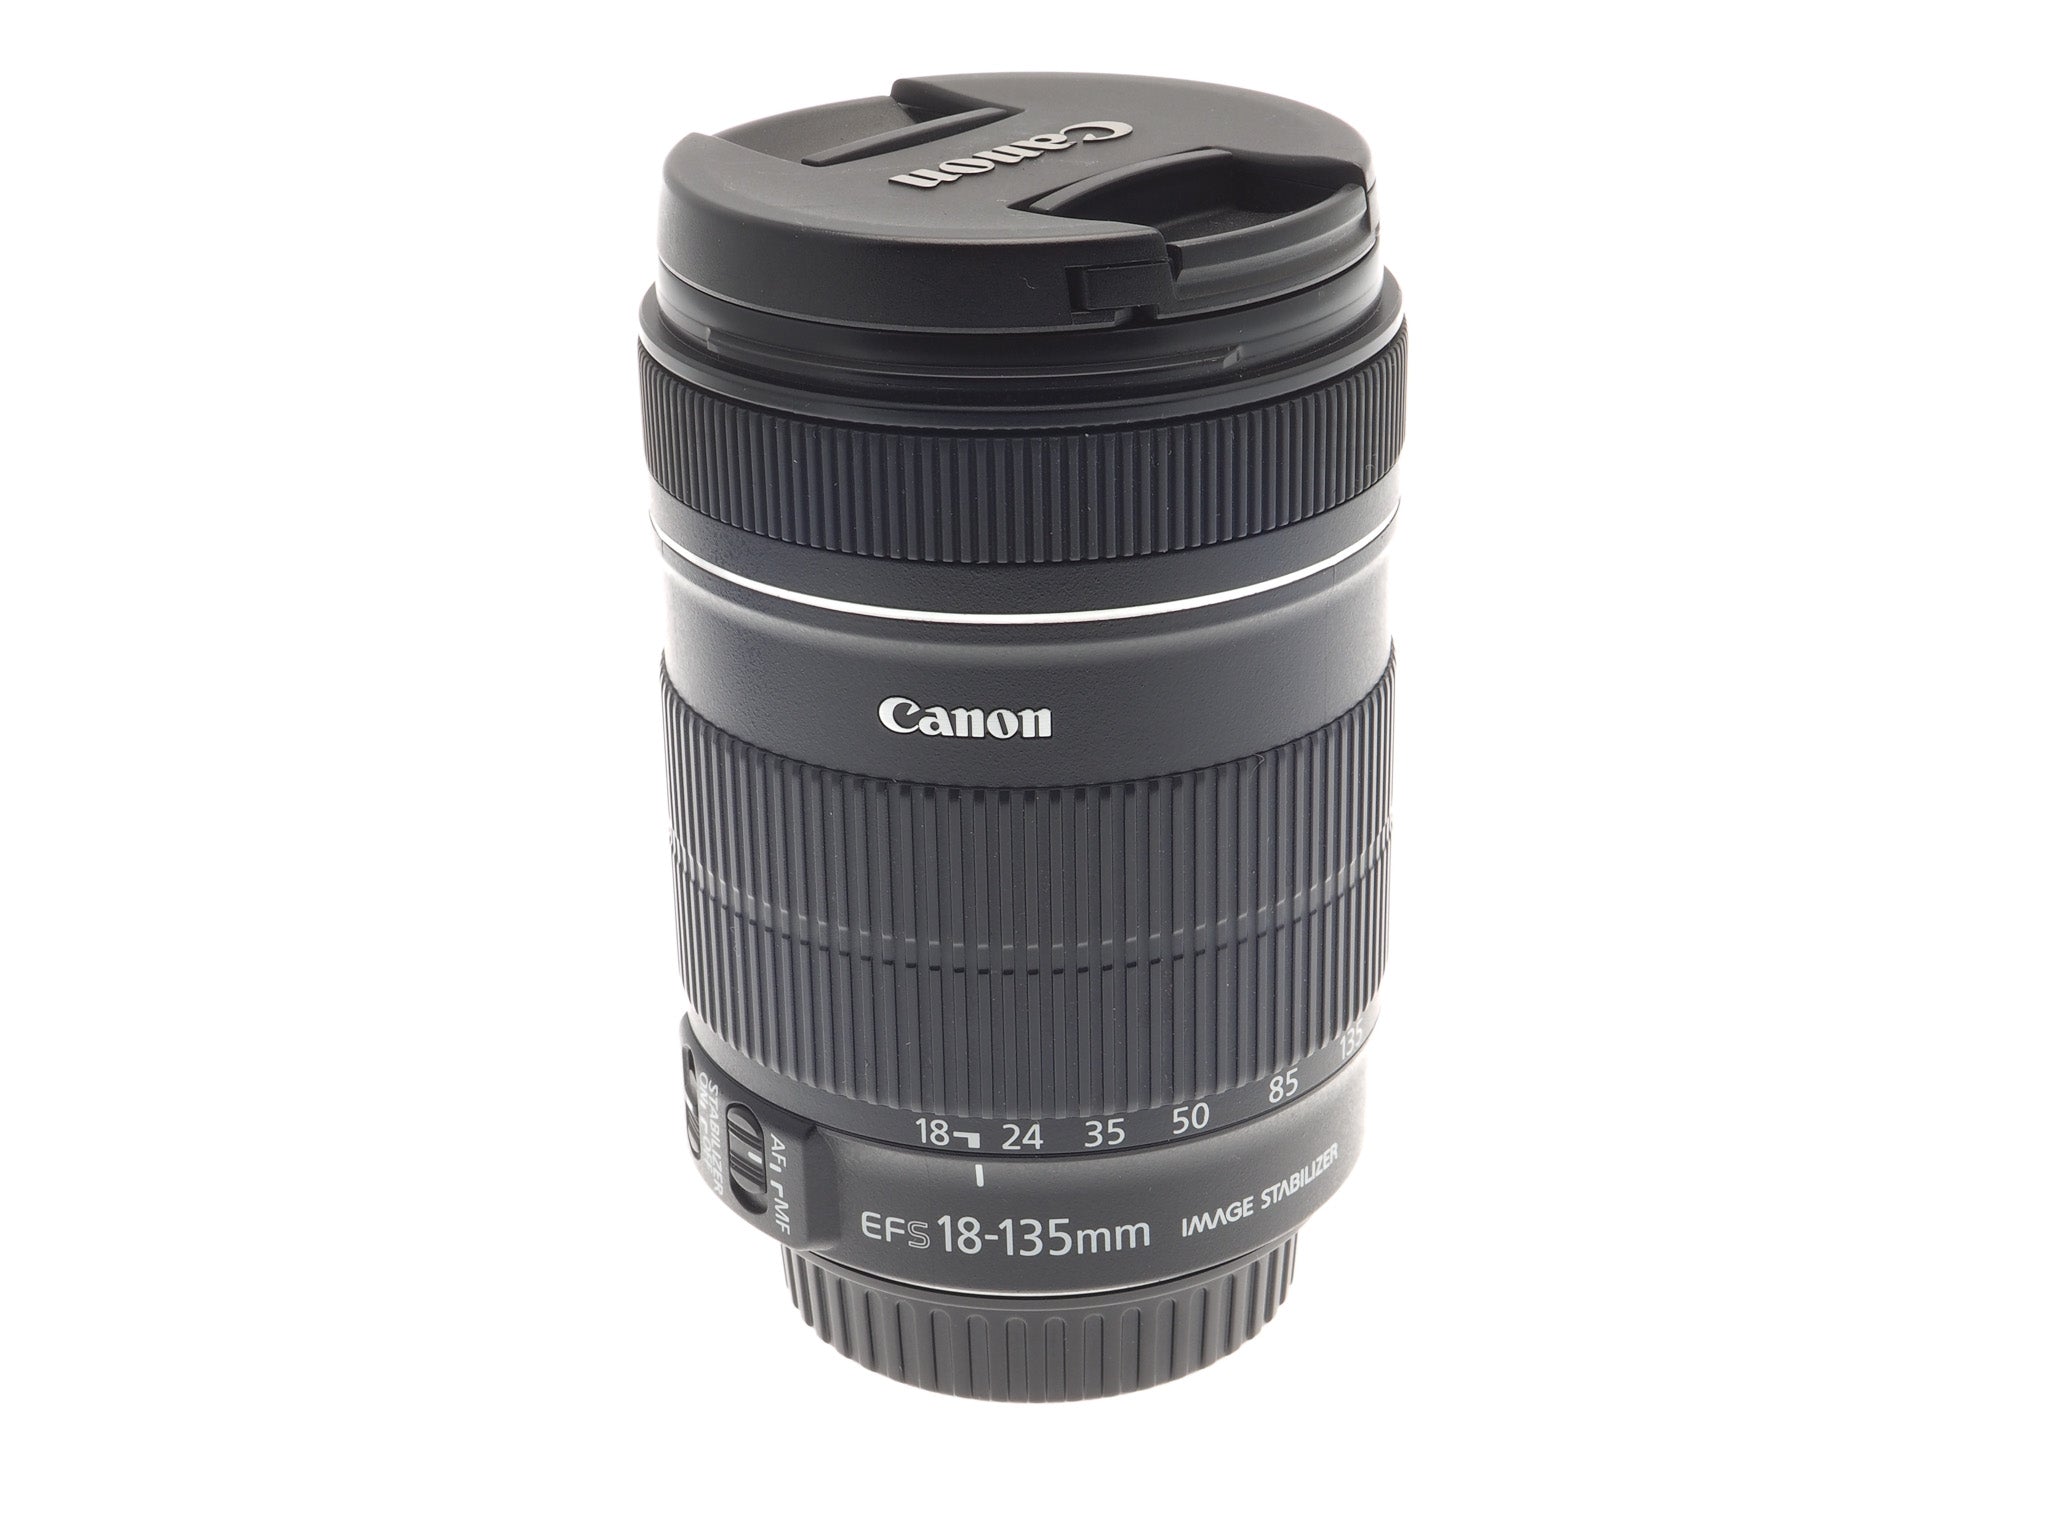 Canon 18-135mm f3.5-5.6 IS - Lens